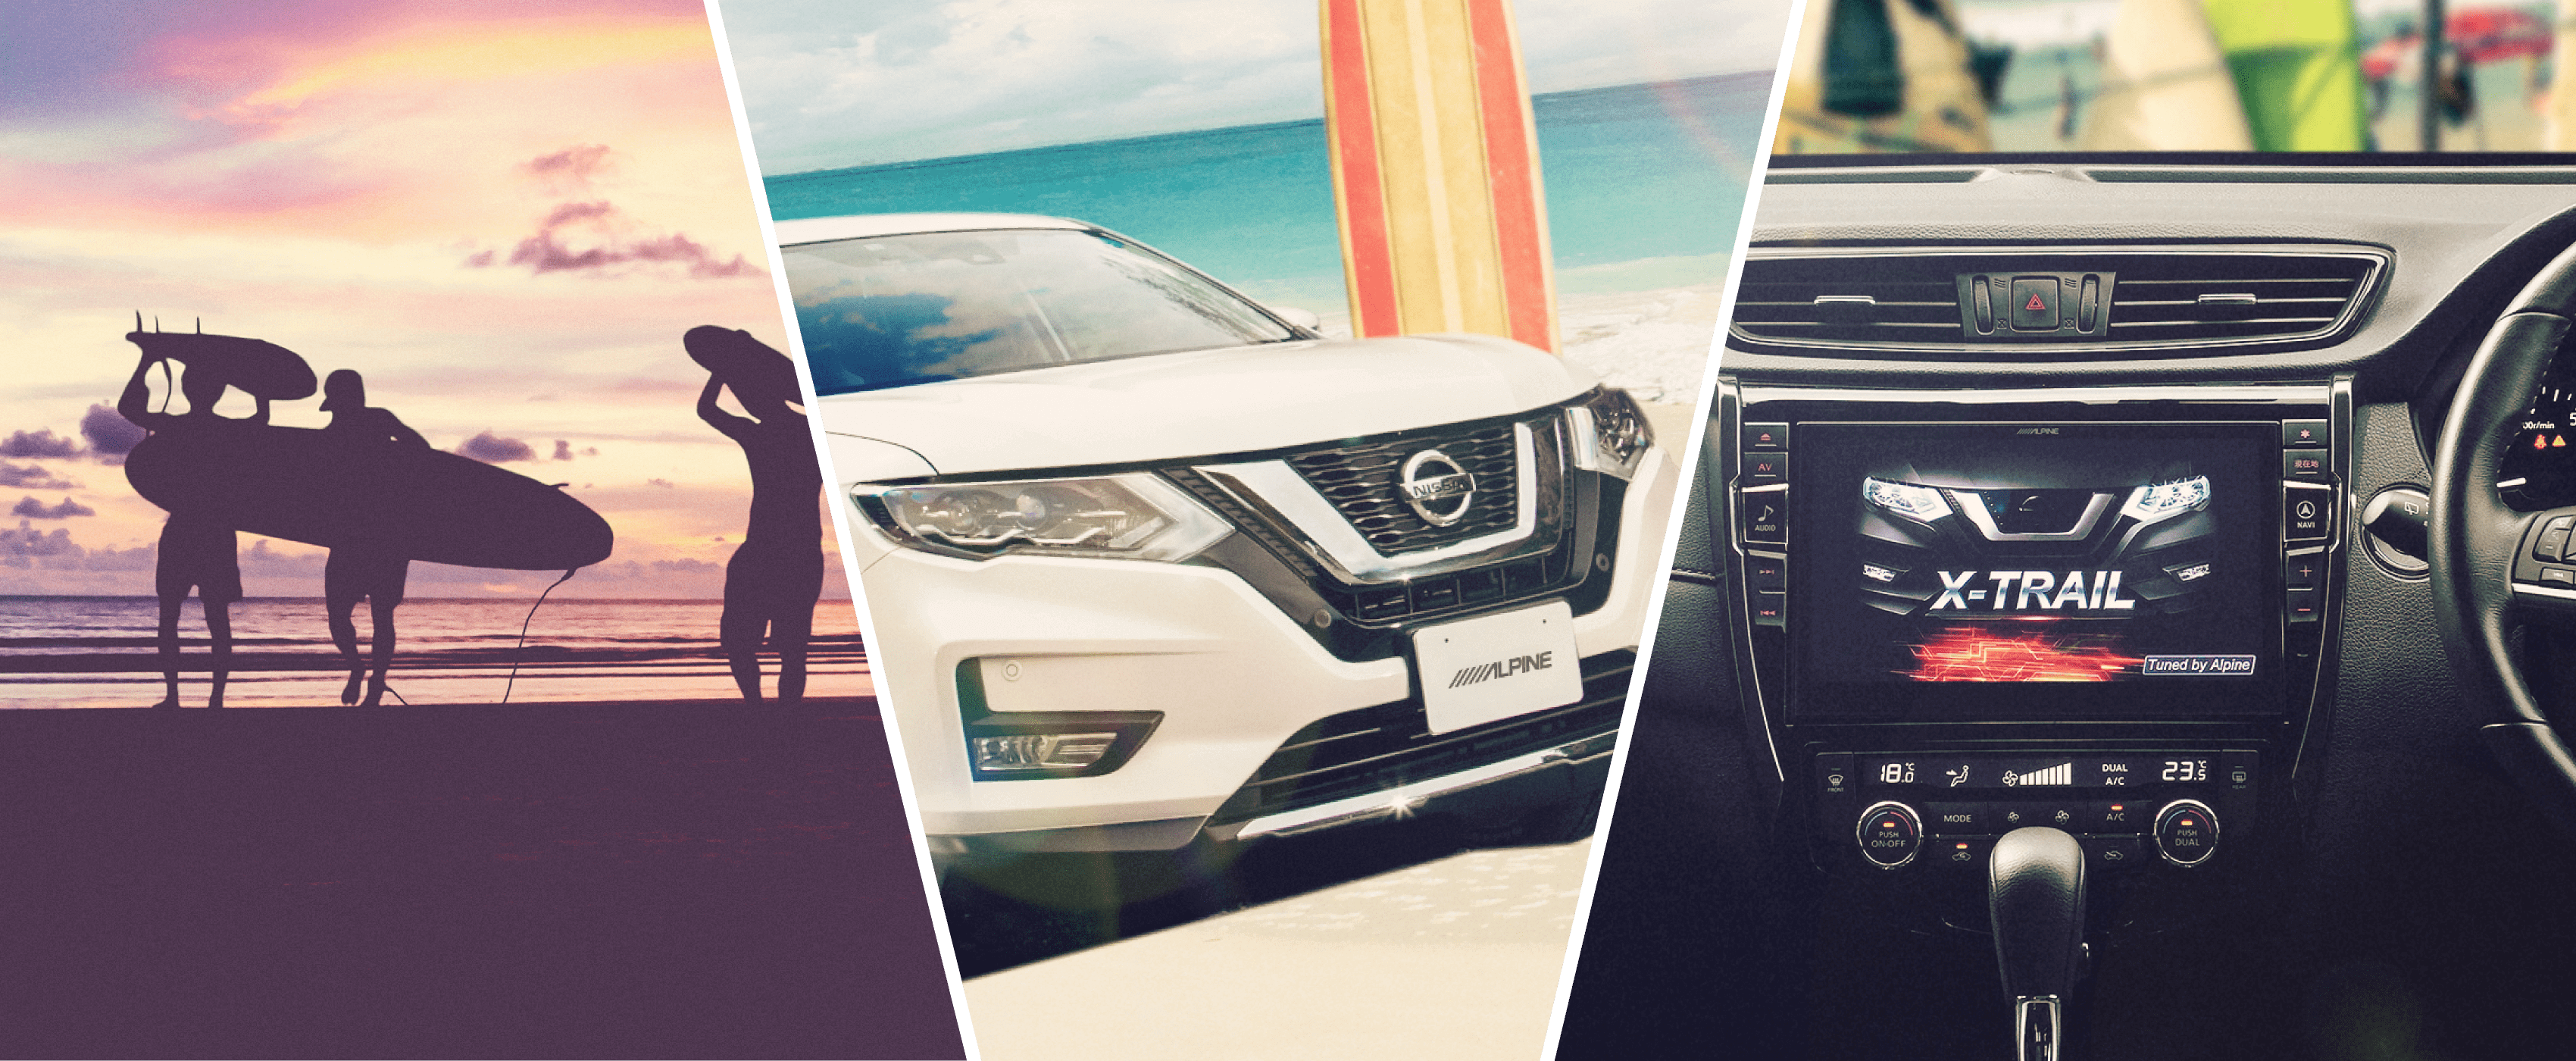 Enjoy surfing with X-trail